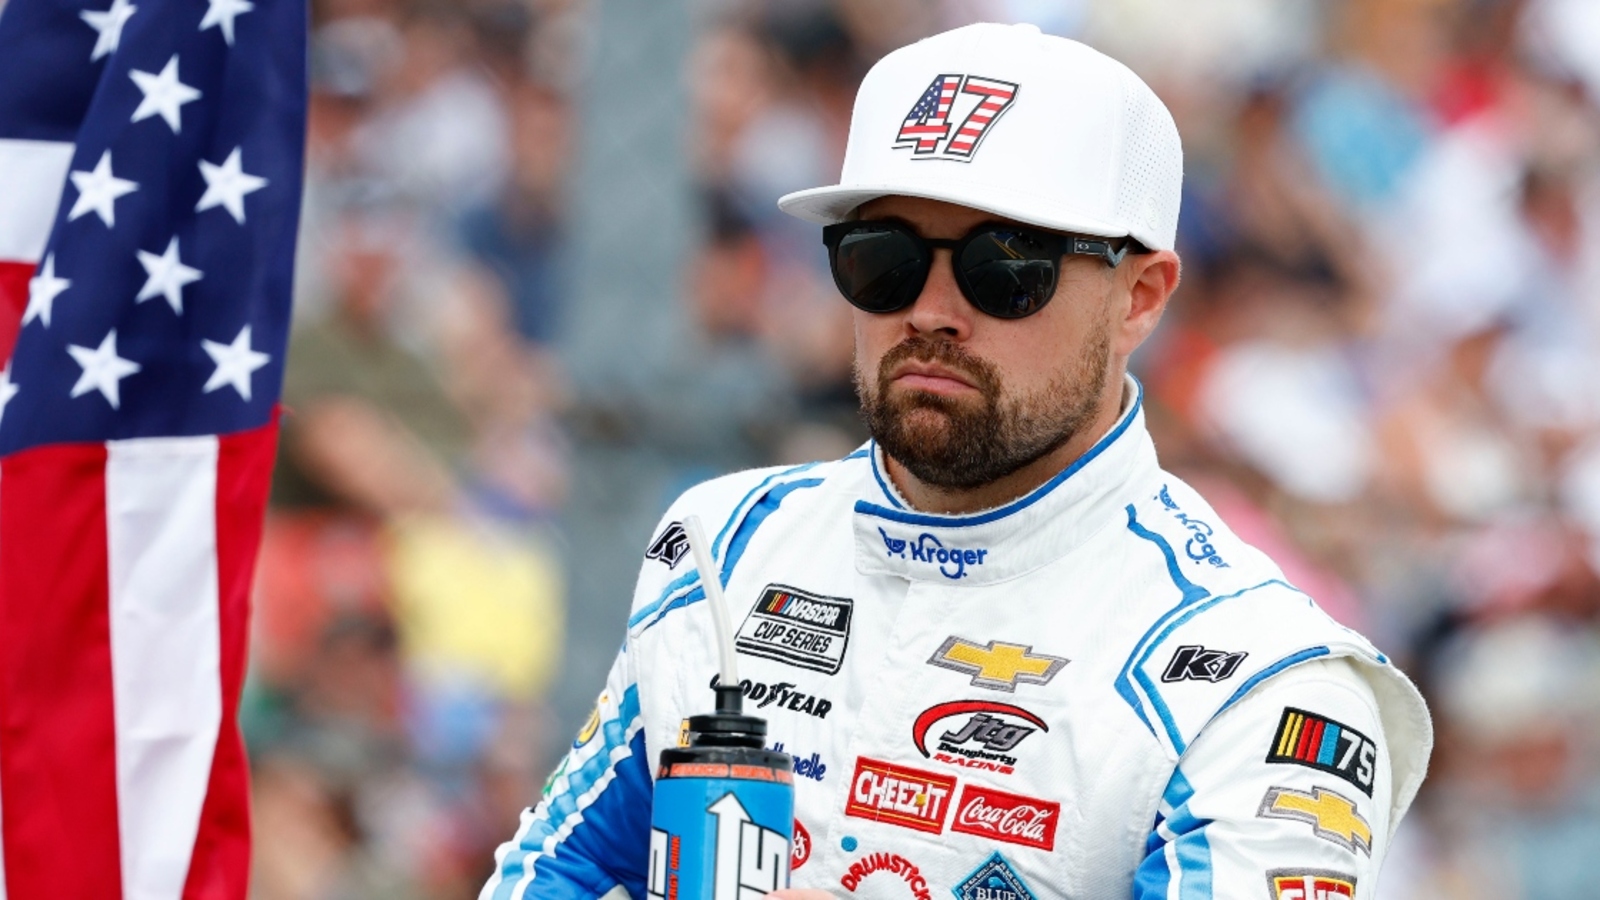 Ricky Stenhouse Jr. says fight with Kyle Busch was broken up ‘too quick’